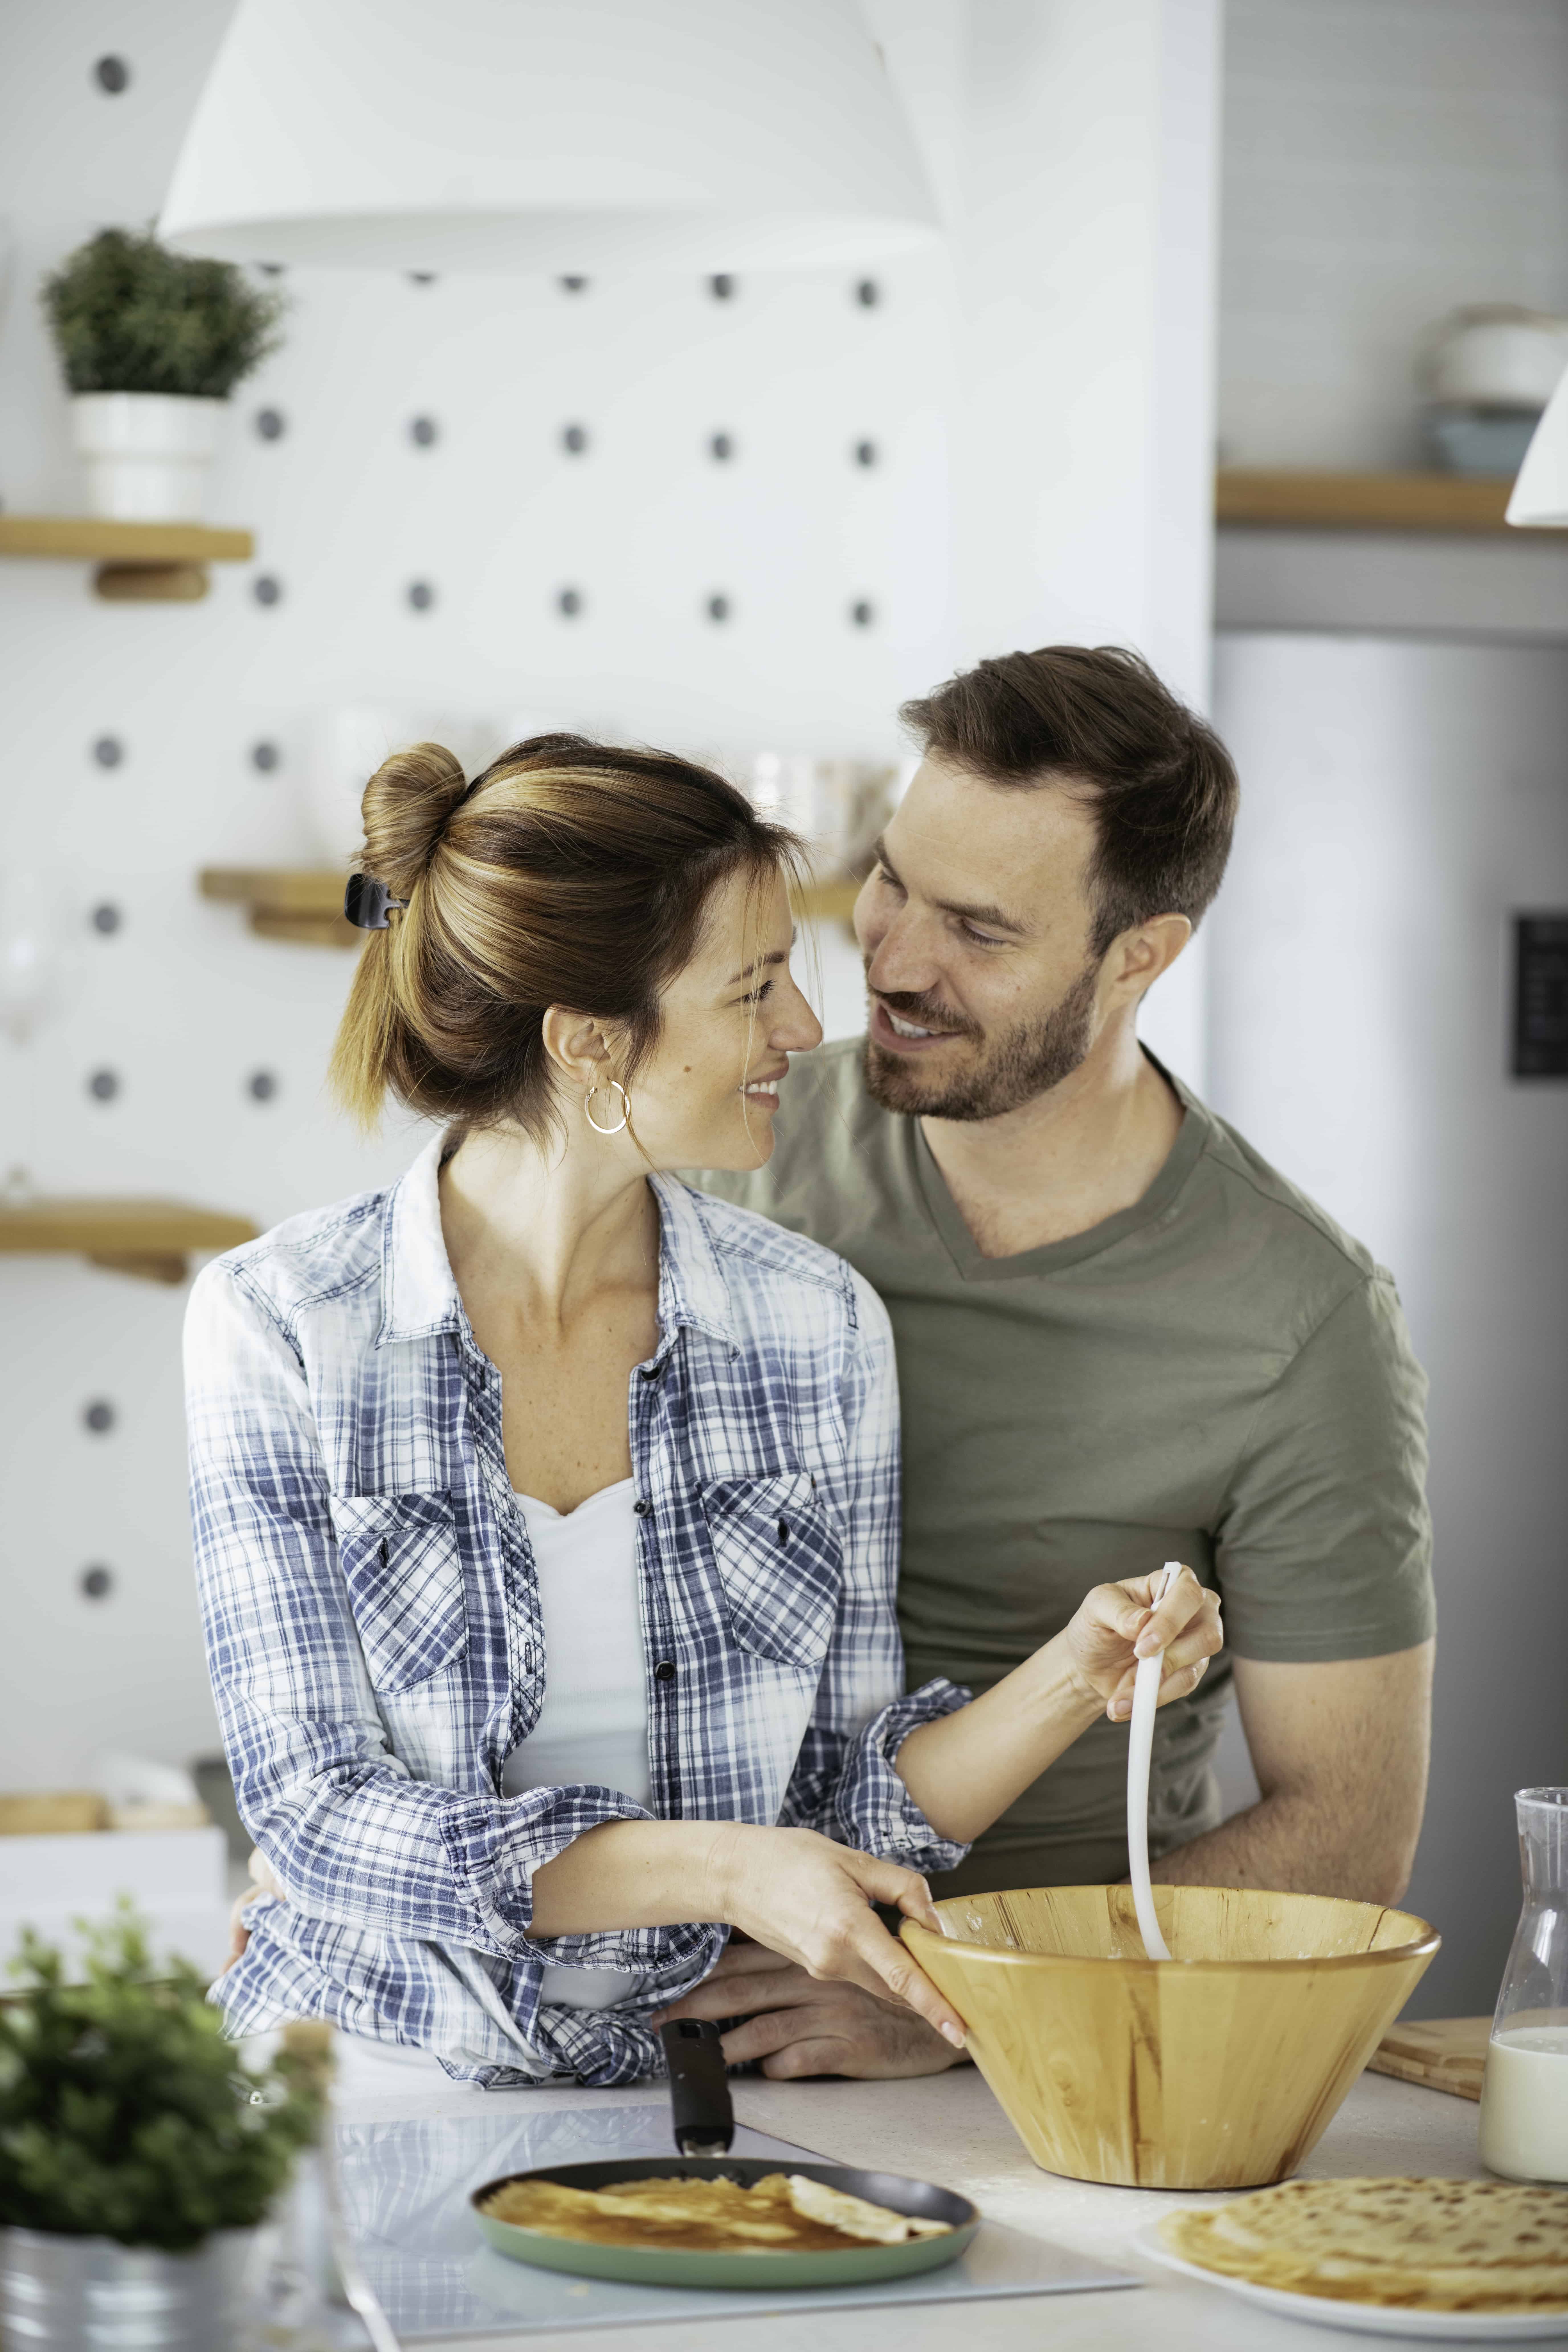 Moms need adult interaction during the stages of motherhood - Couple making breakfast together